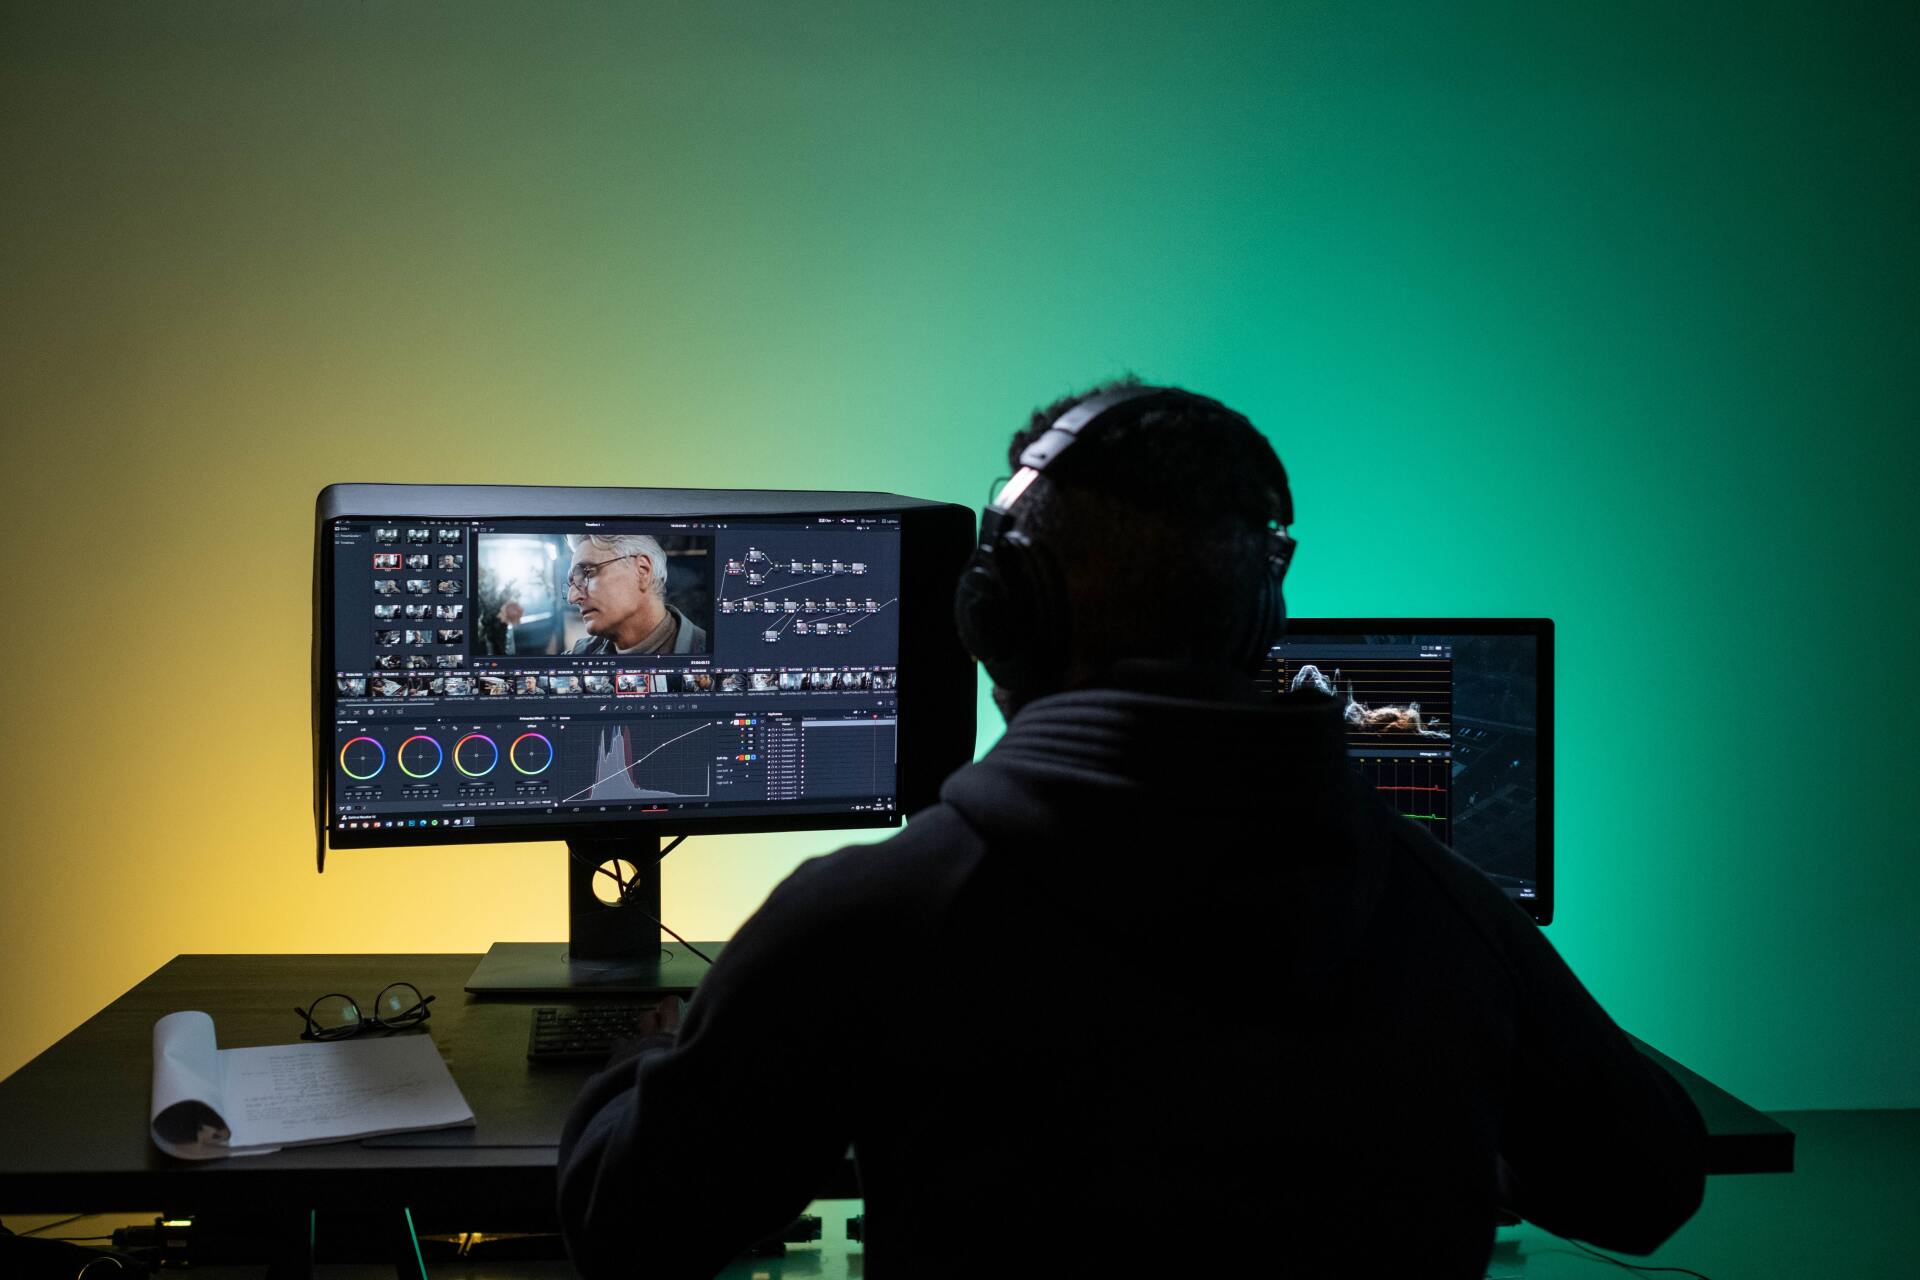 Person working at a video editing station with colored background behind